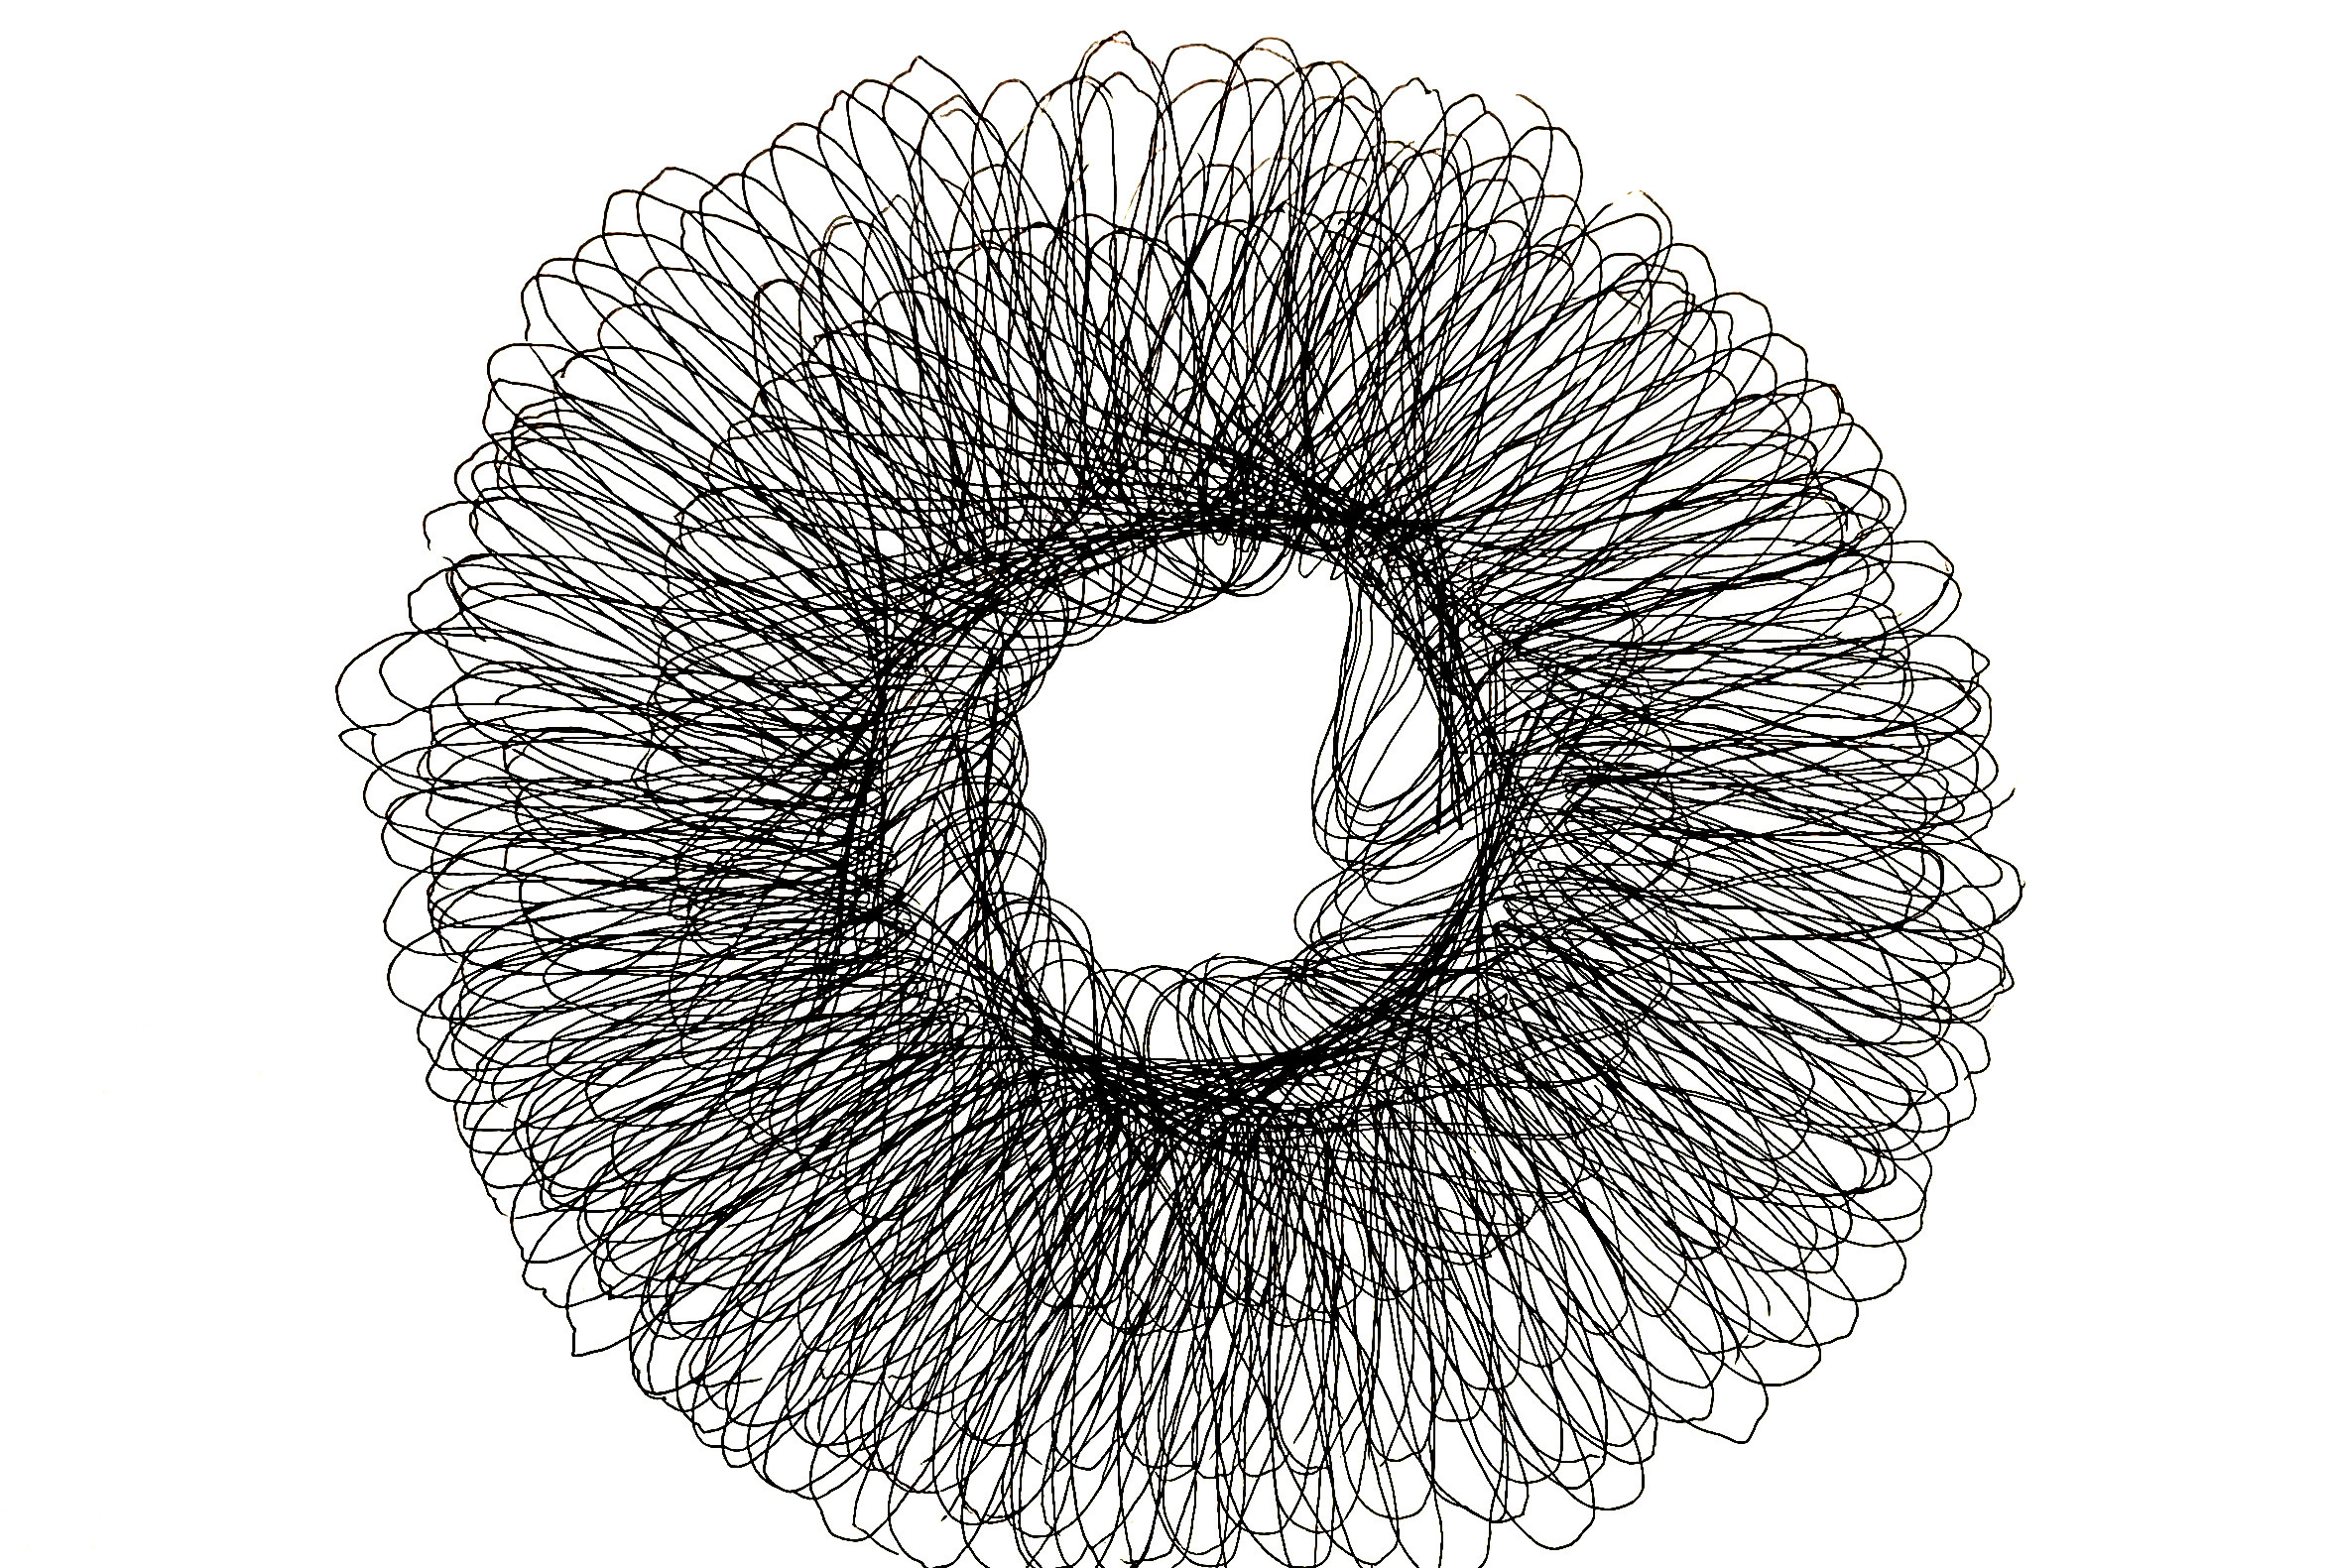 All it took was a Spirograph to make my day